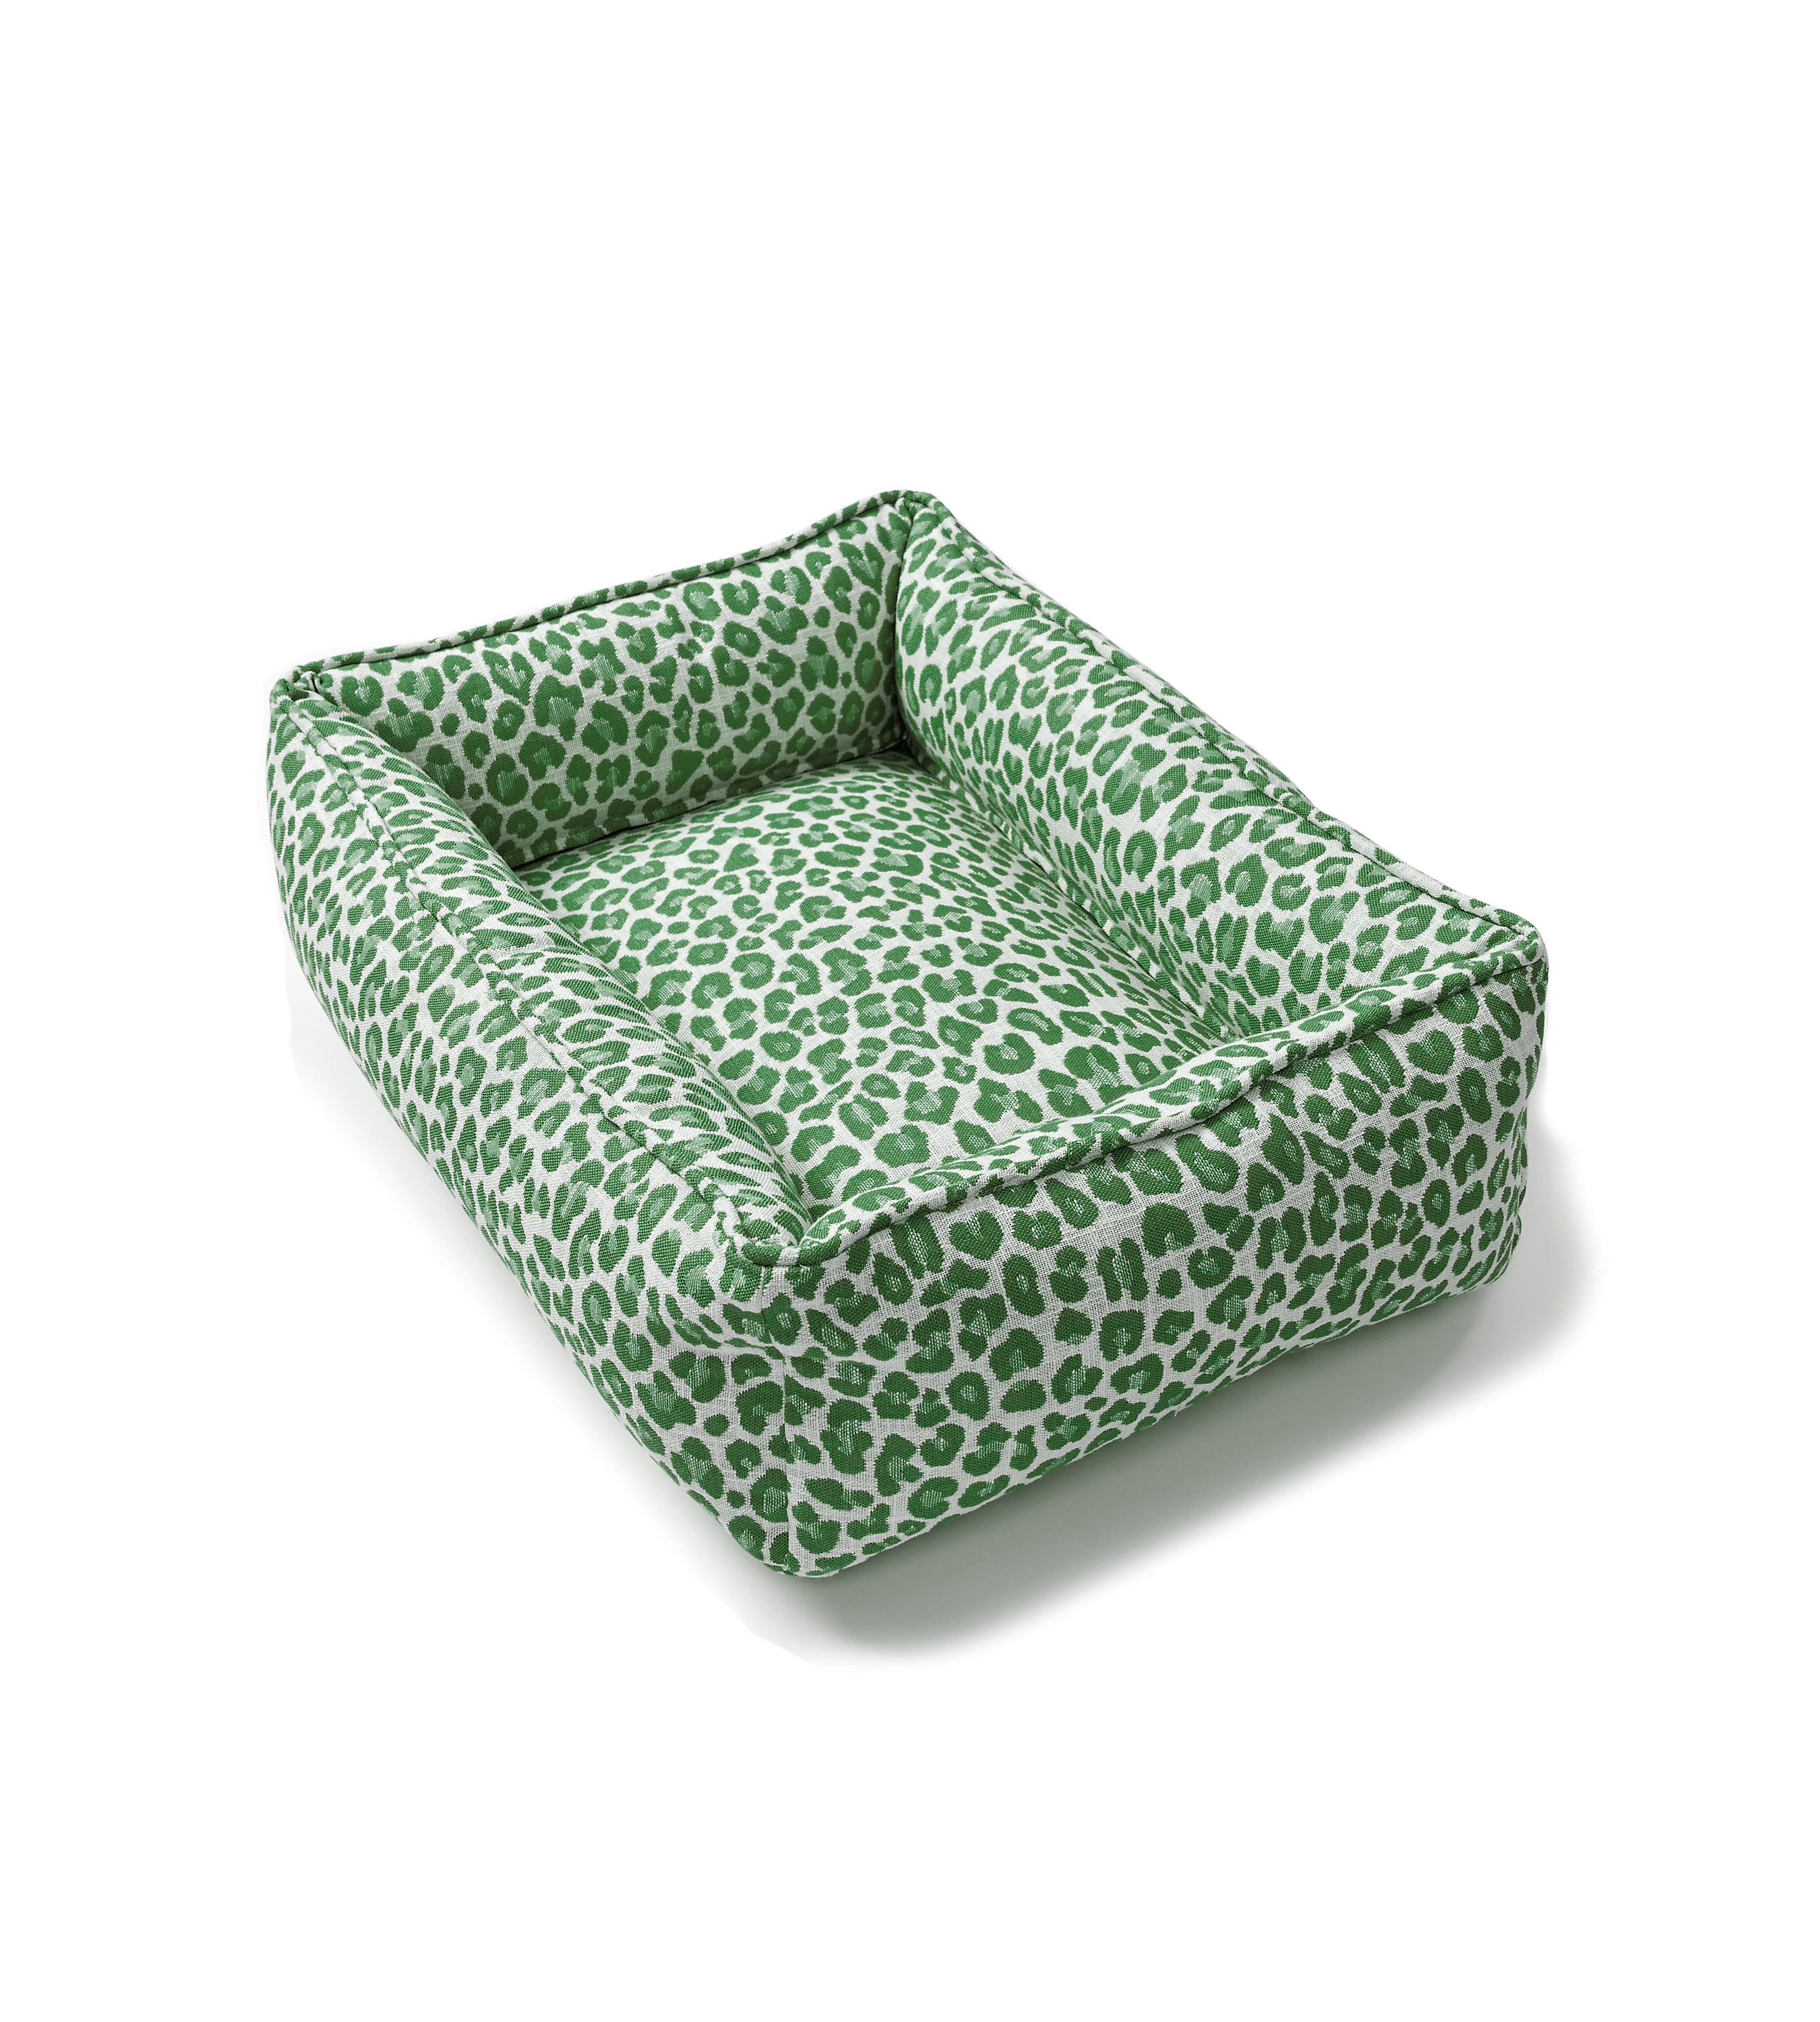 North American Backyard Bengal Small Dog Bed For Sale